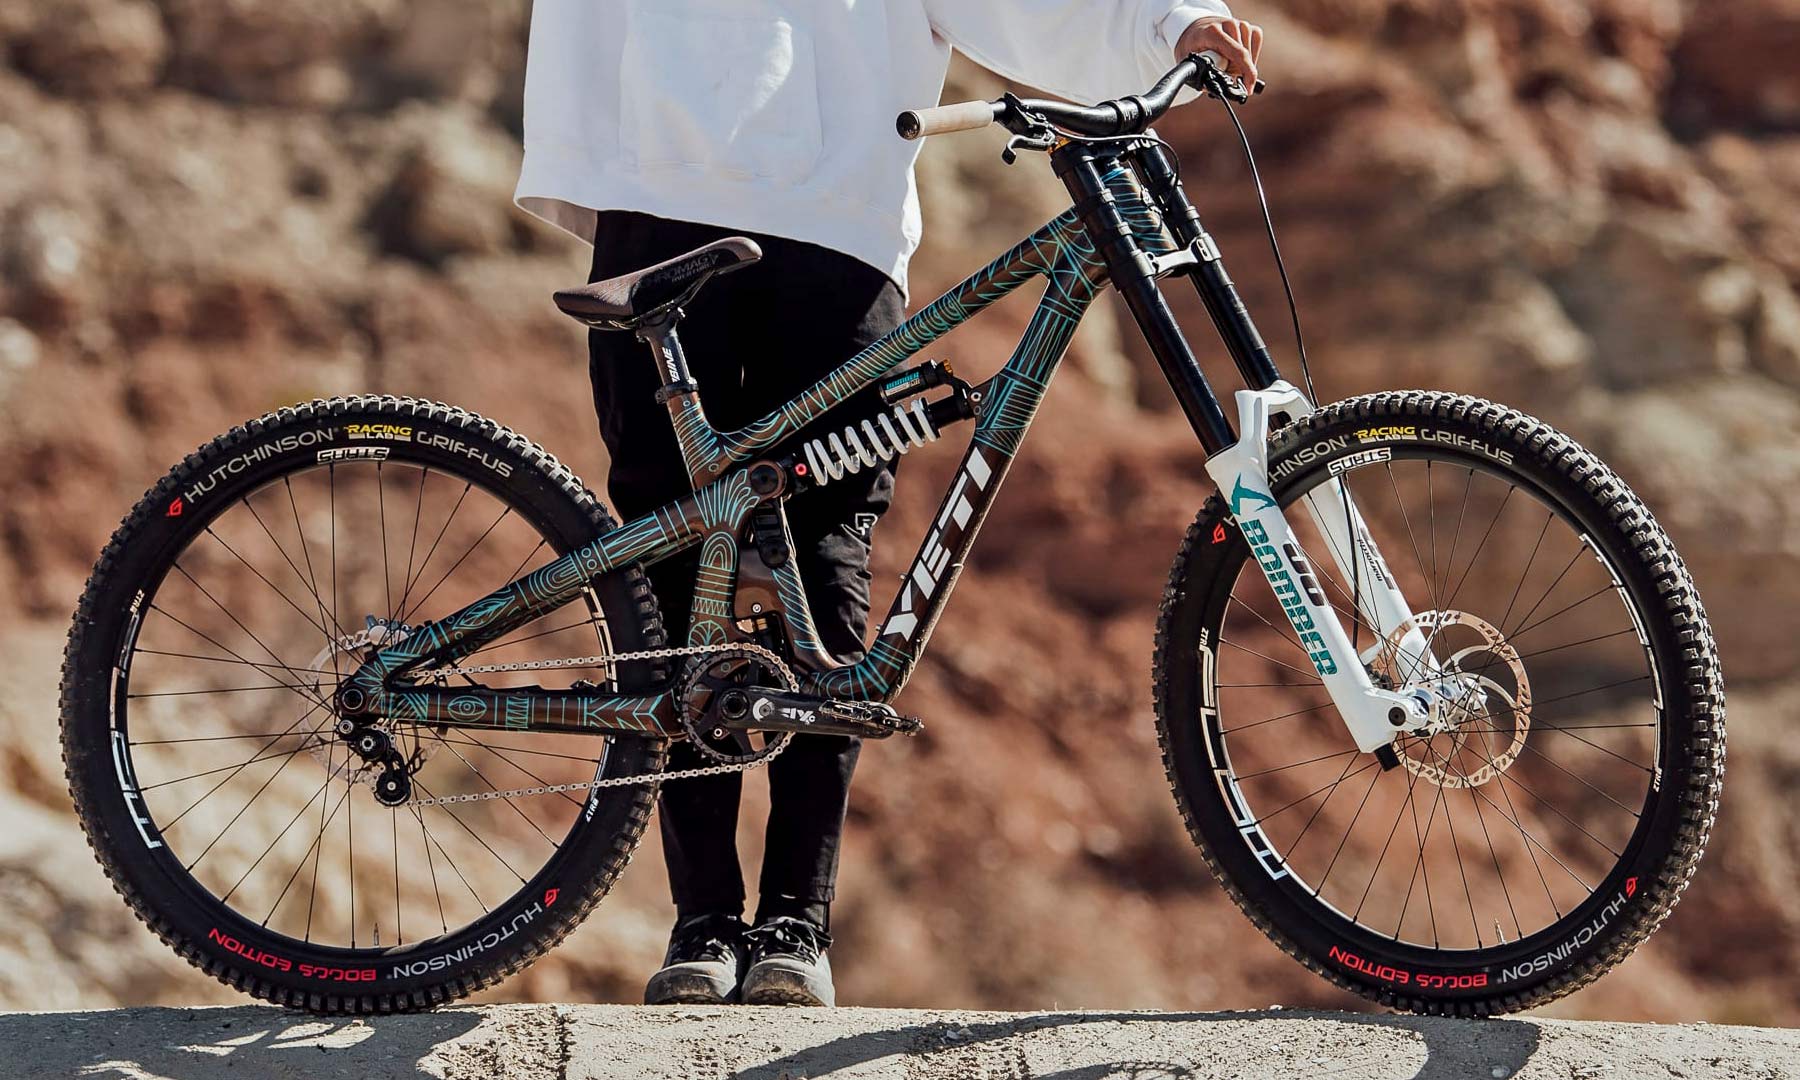 Red Bull Rampage Pro Bike Check Roundup, photo by Bartek Wolinski, Reed Boggs